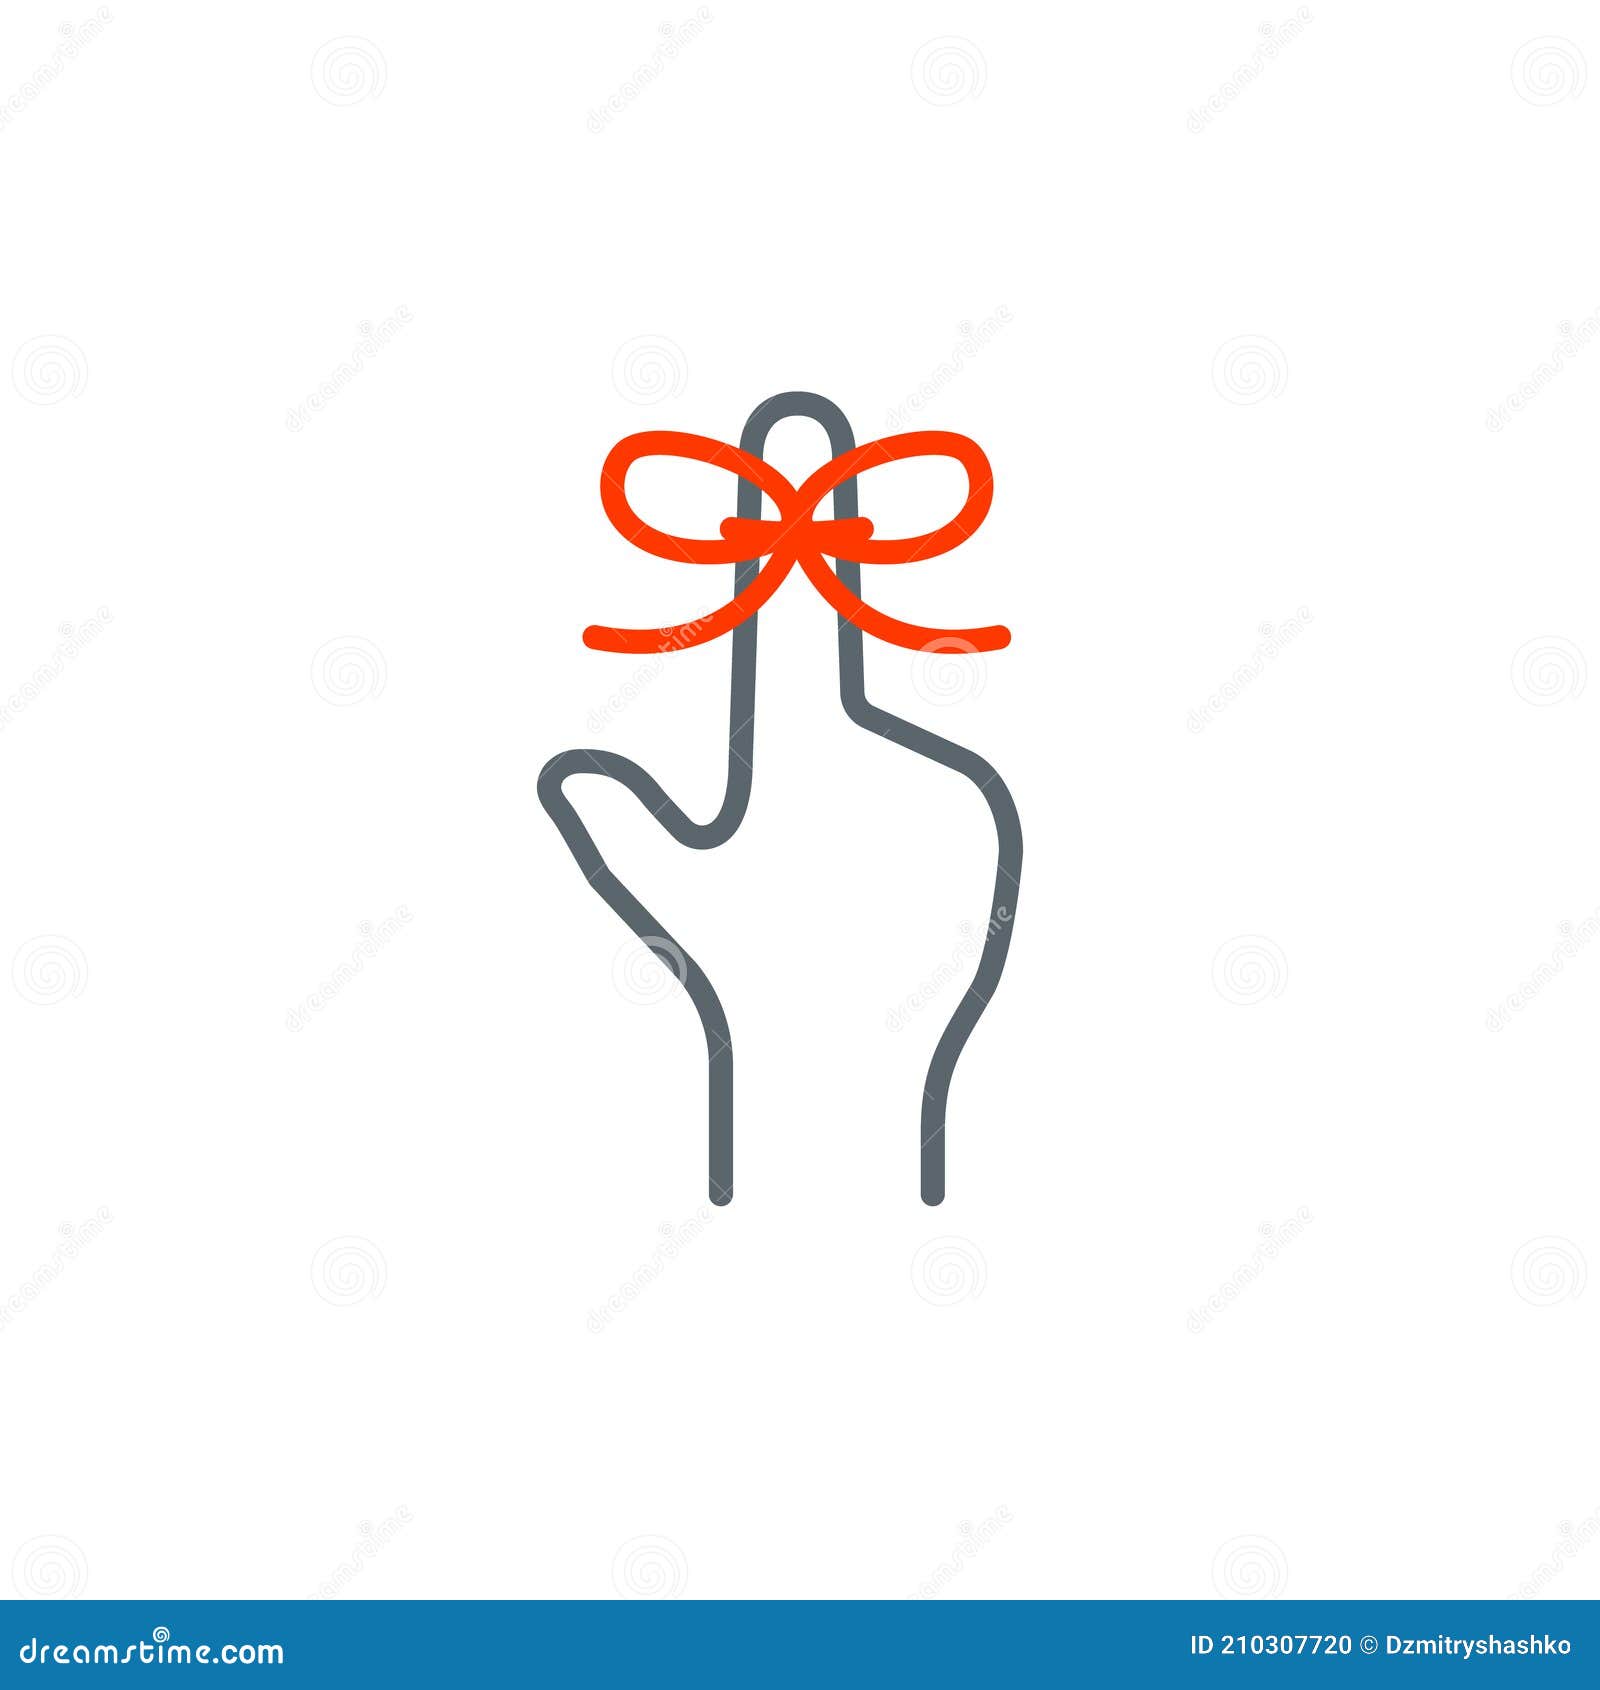 dont forget finger string line icon. clipart image